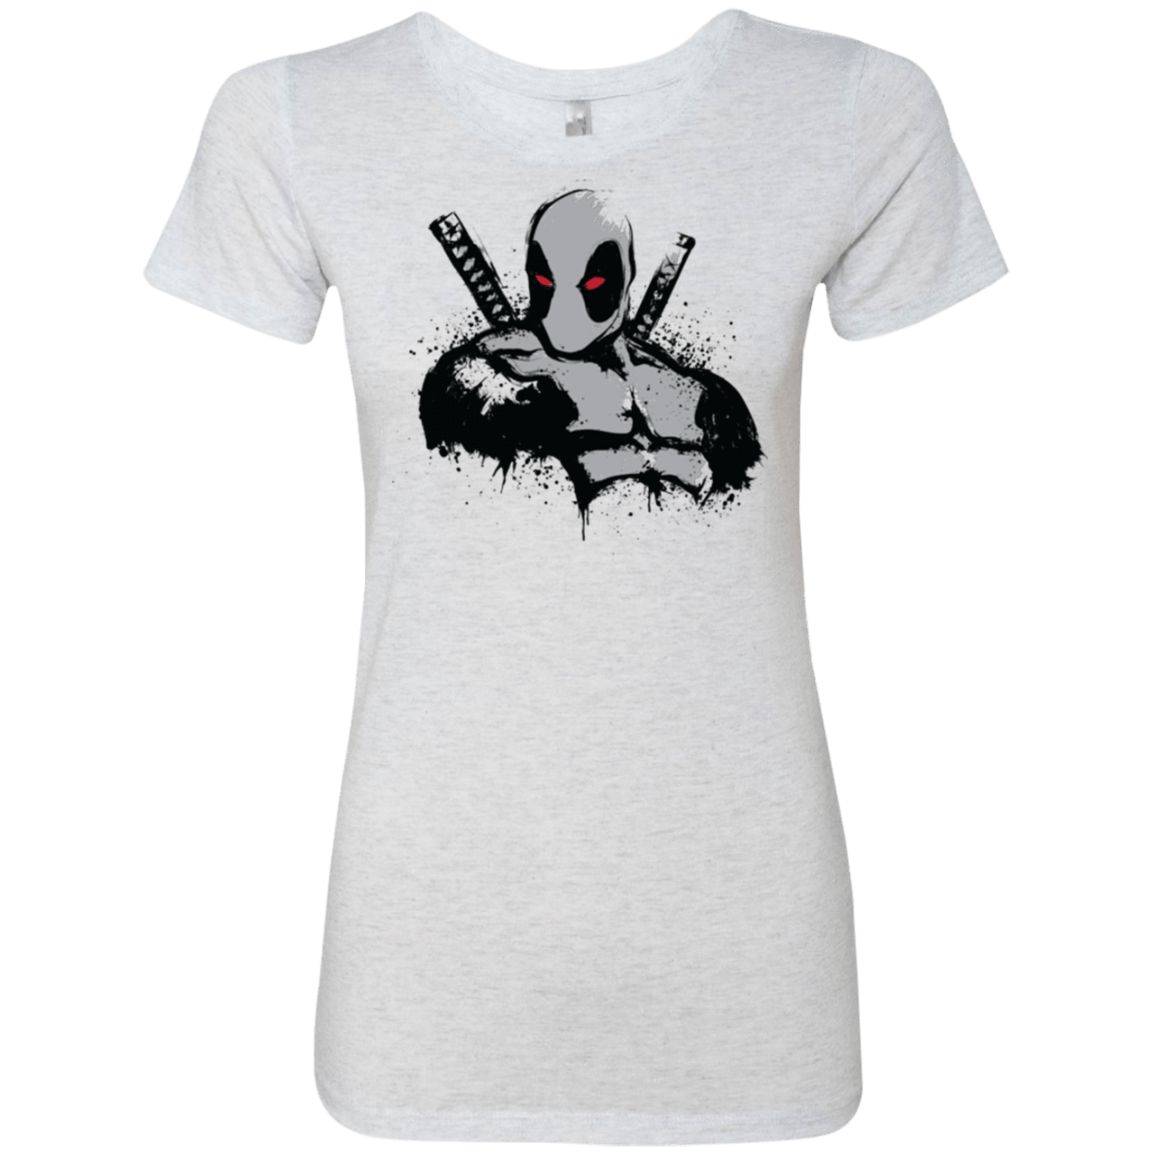 T-Shirts Heather White / Small Merc in Grey X Force Women's Triblend T-Shirt